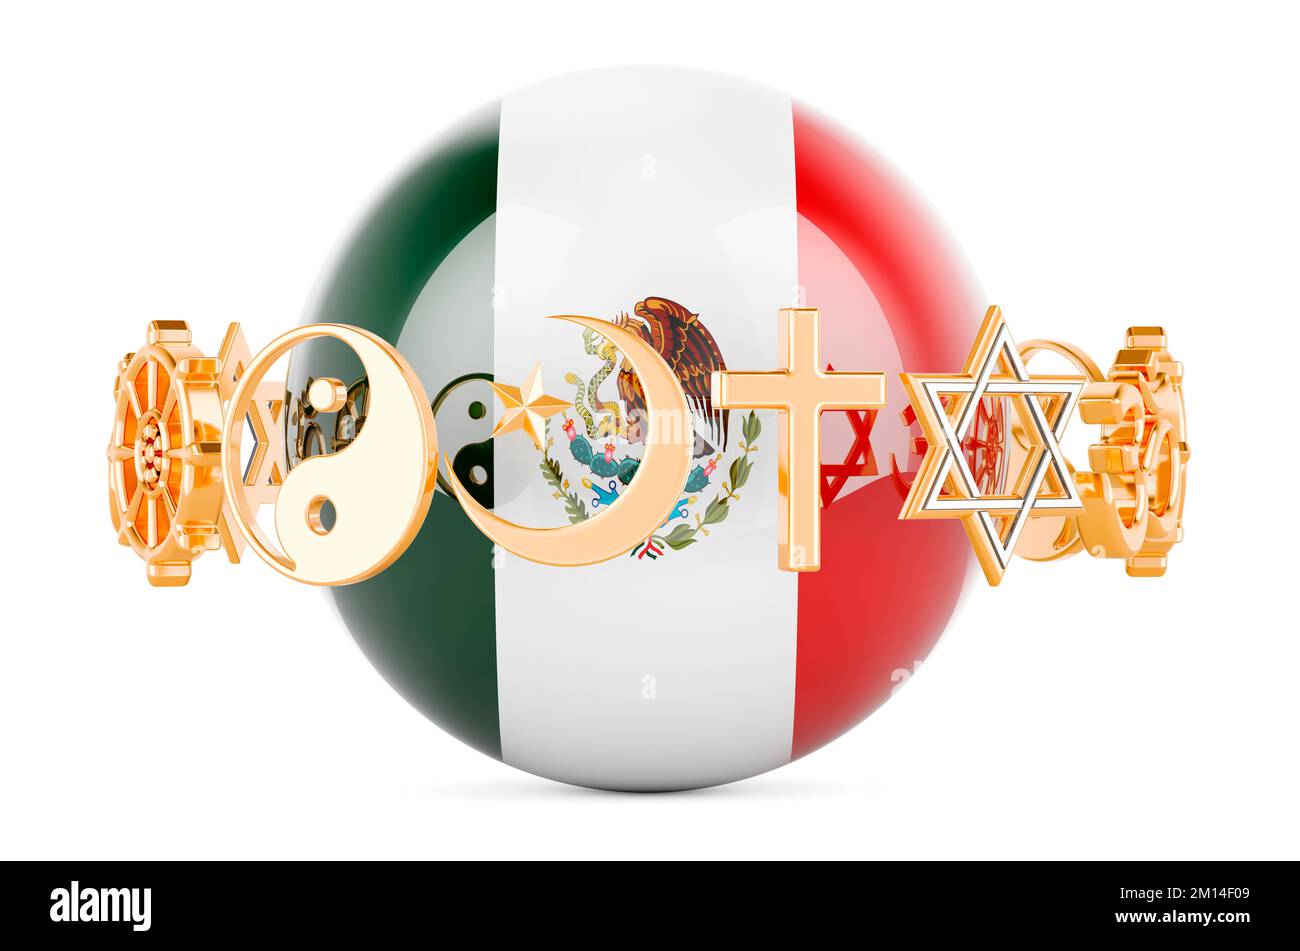 Mexican flag painted on sphere with religions symbols around, 3D rendering isolated on white background Stock Photo